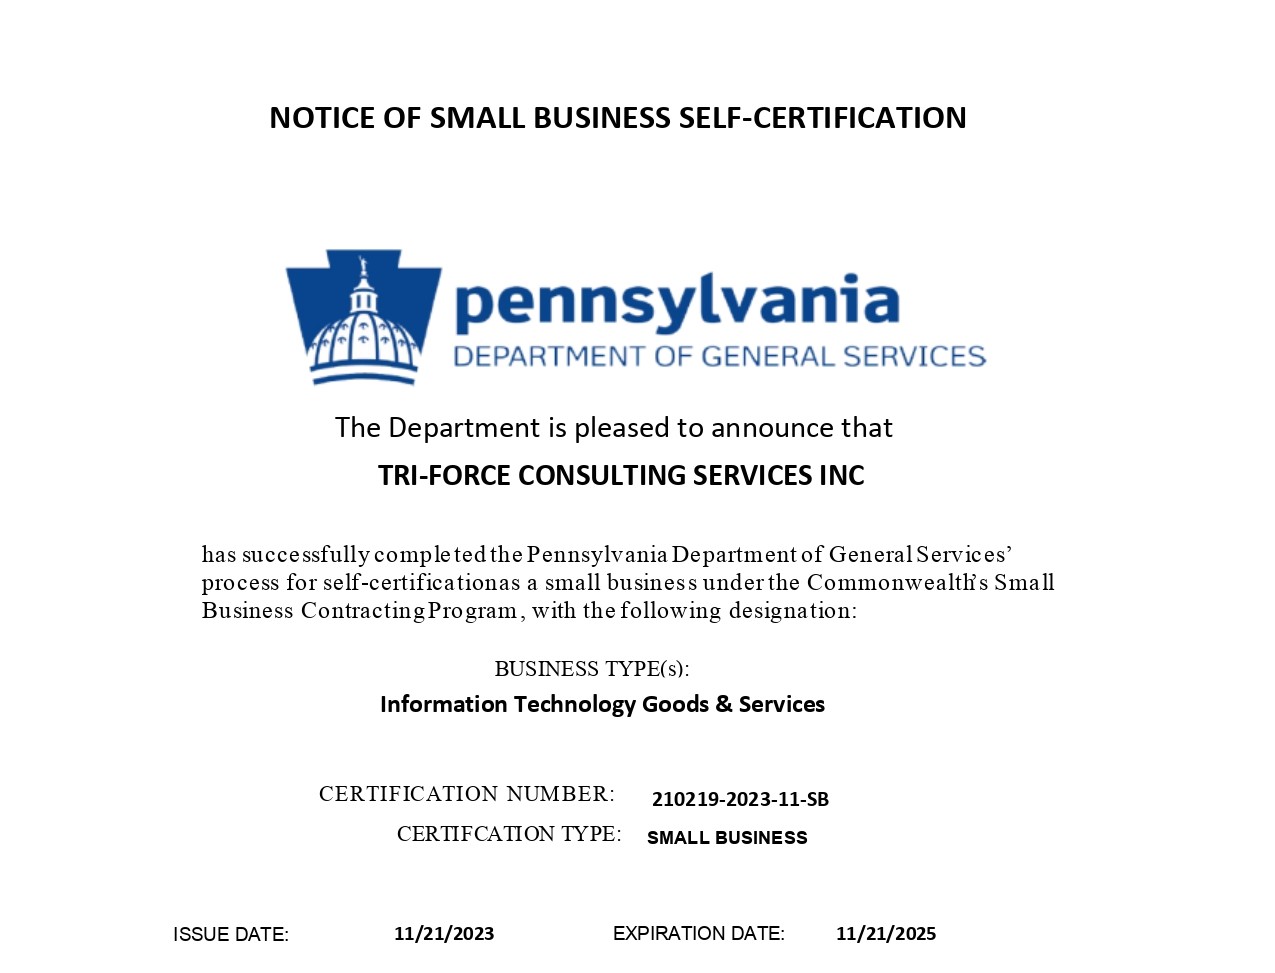 TRI FORCE CONSULTING SERVICES INC SB Certificate page